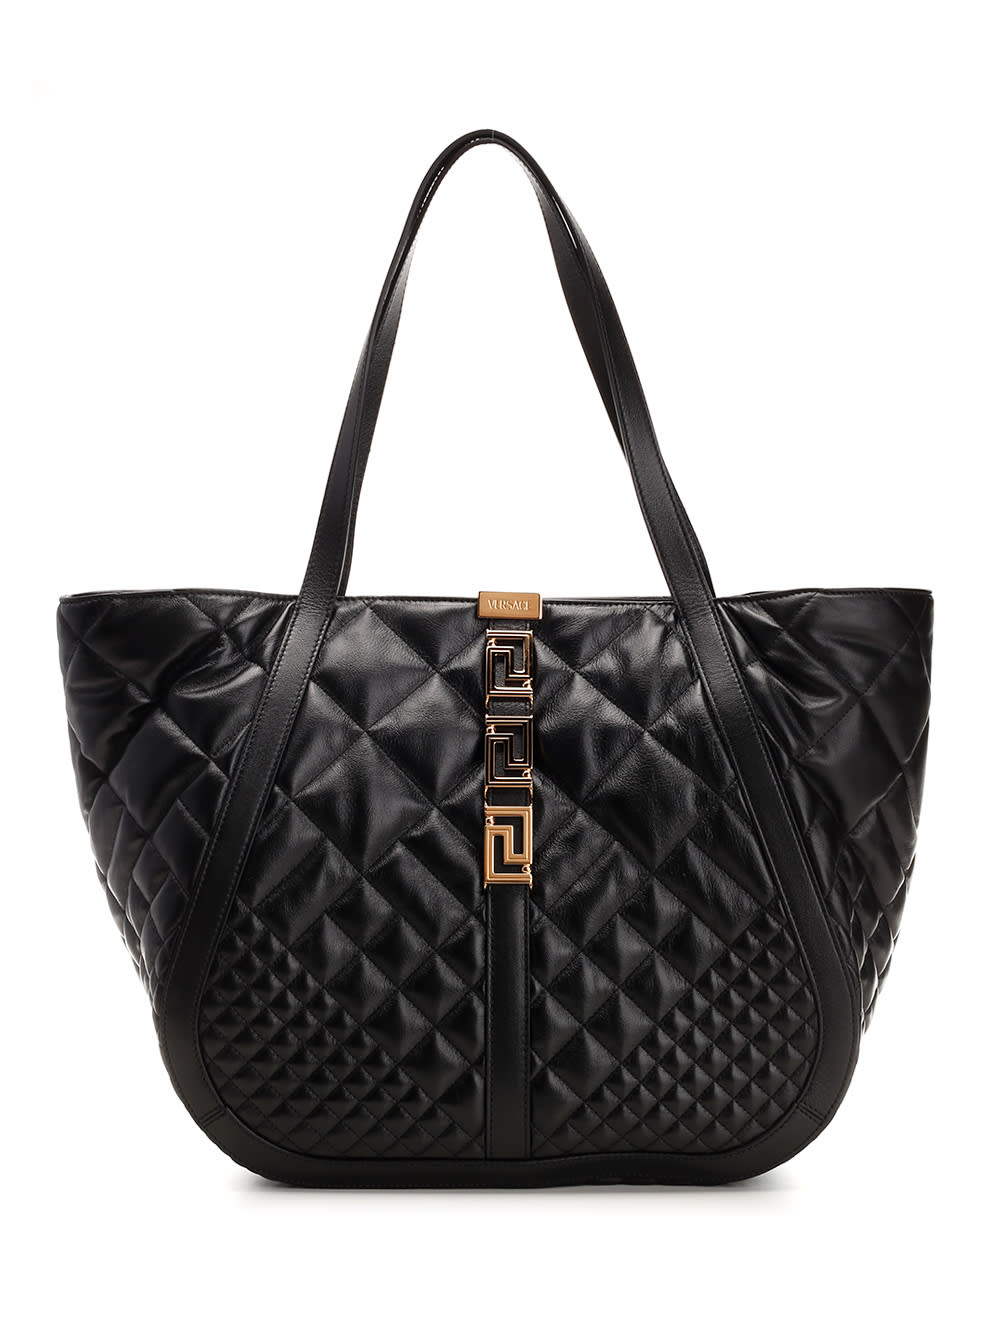 VERSACE QUILTED LEATHER TOTE